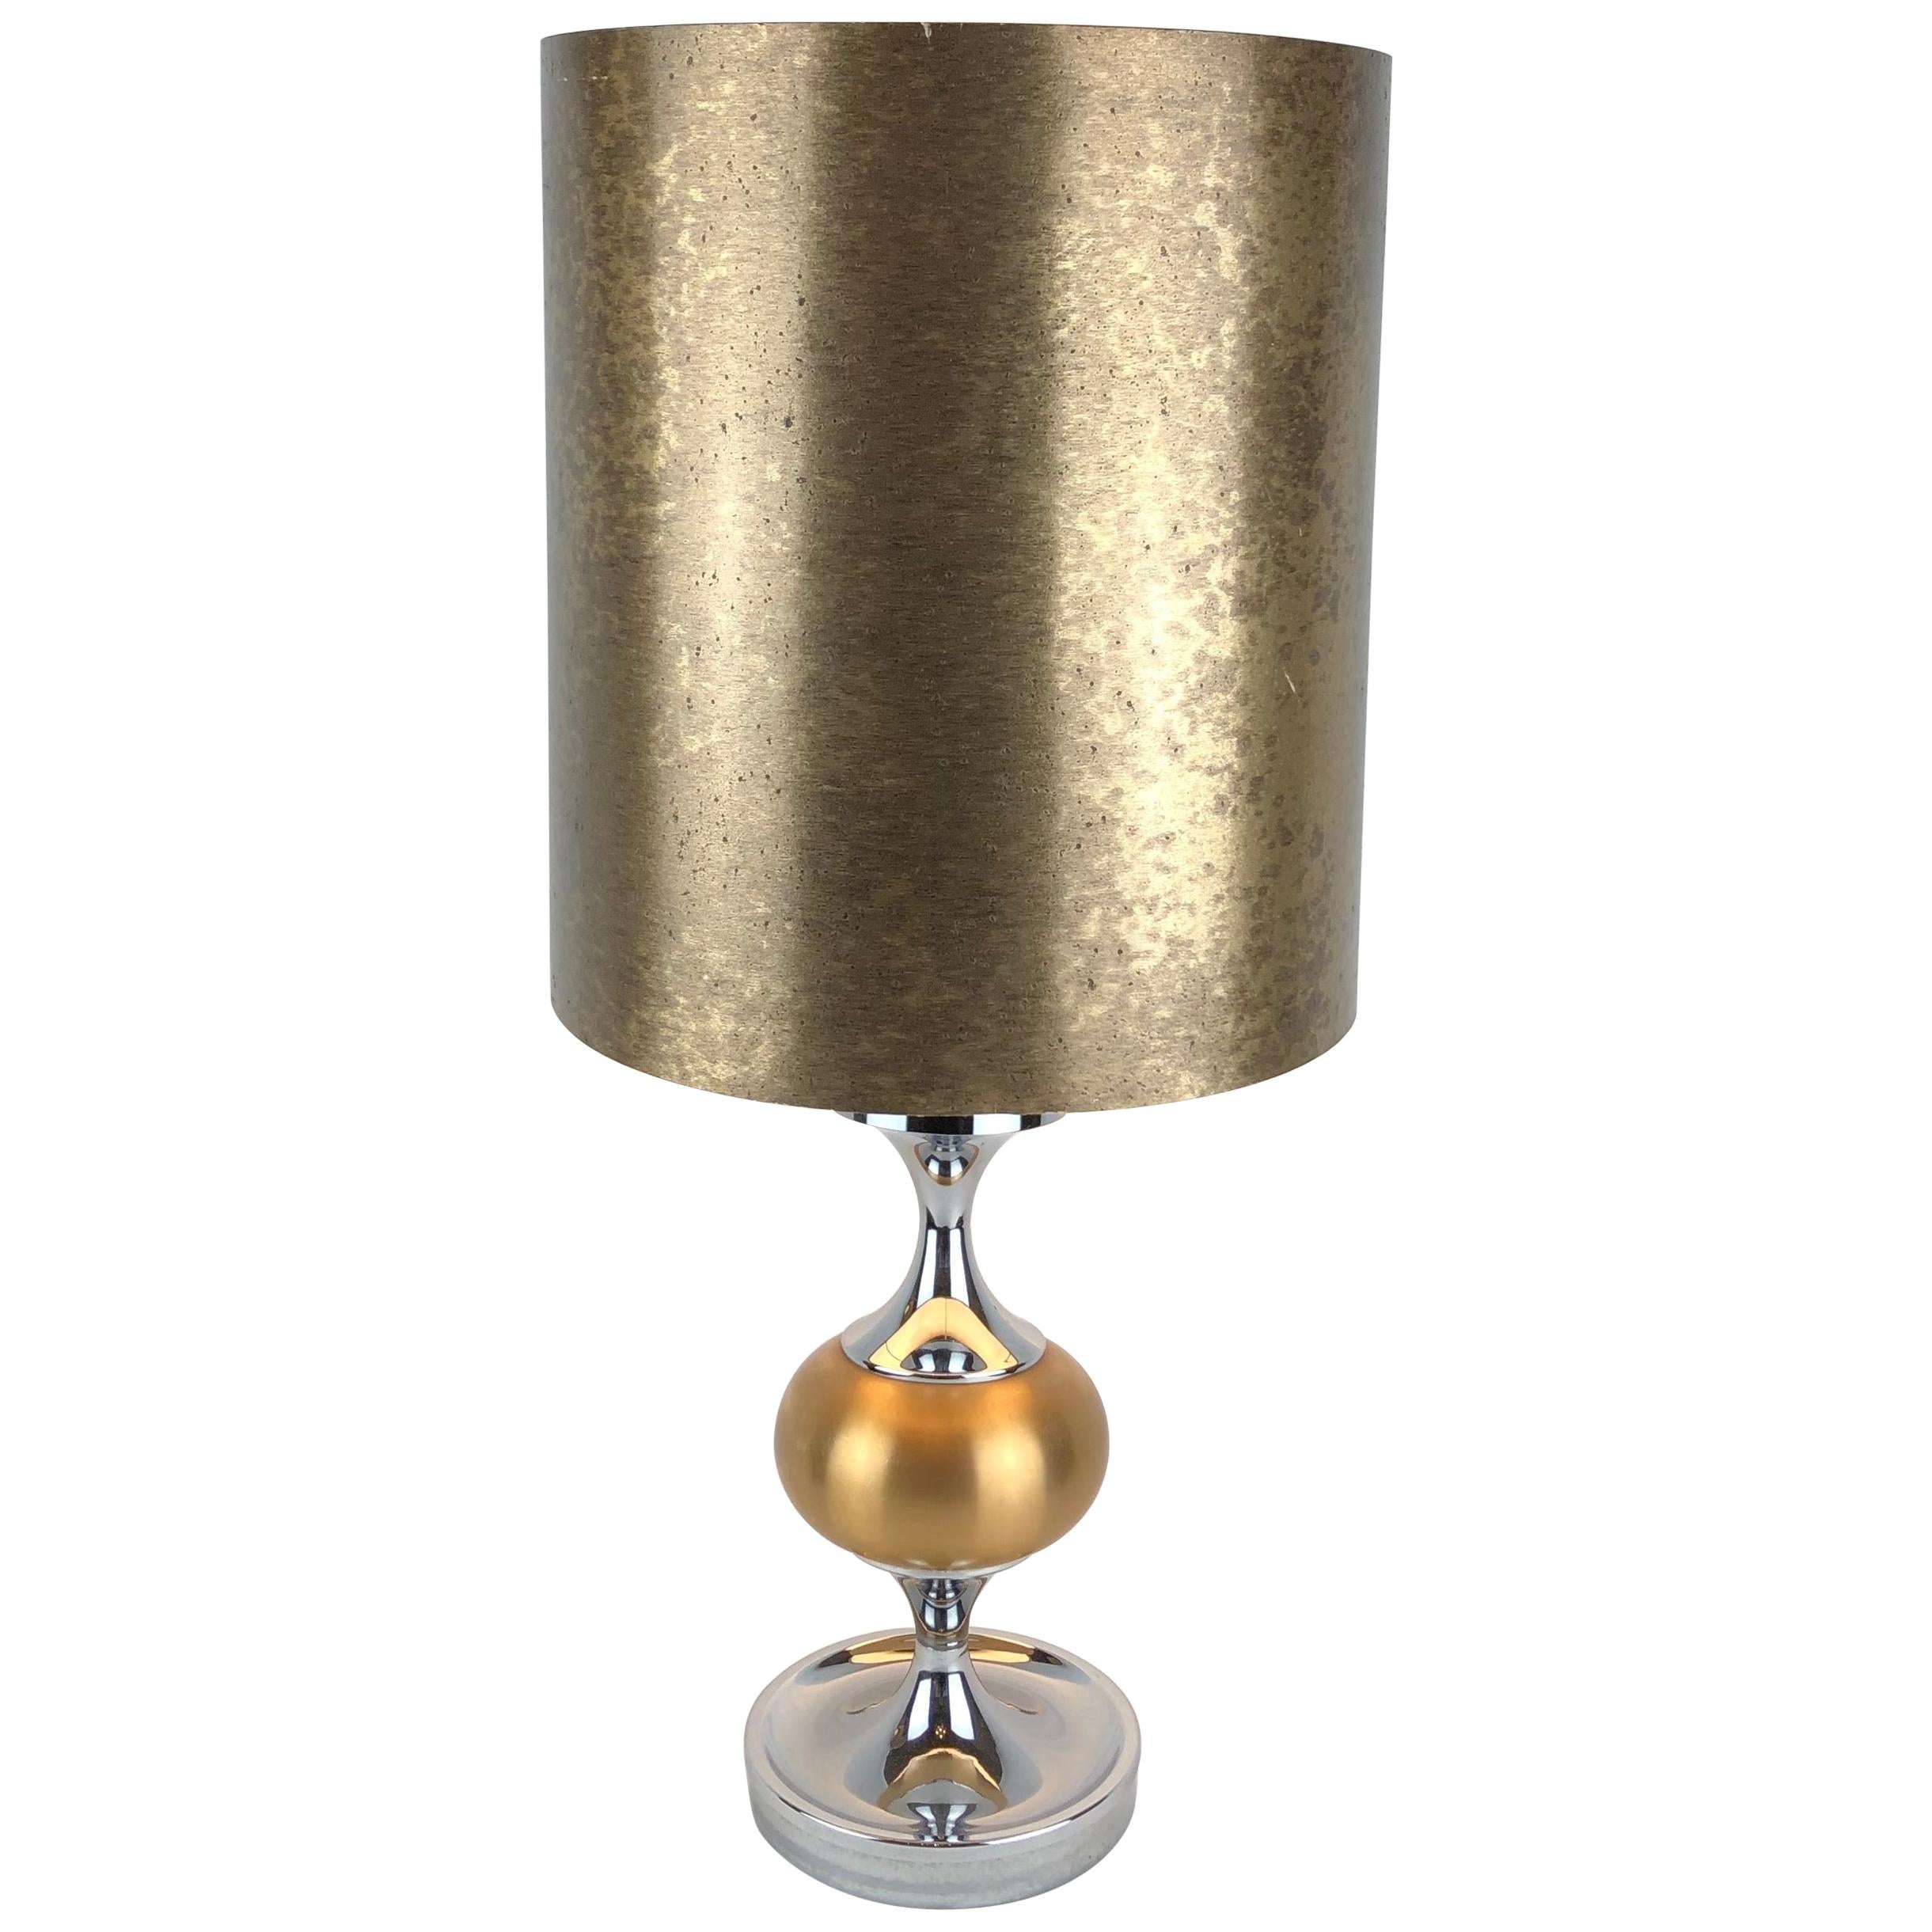 French Midcentury Maison Jansen Inspired Chrome Gold Shaded Table Lamp For Sale